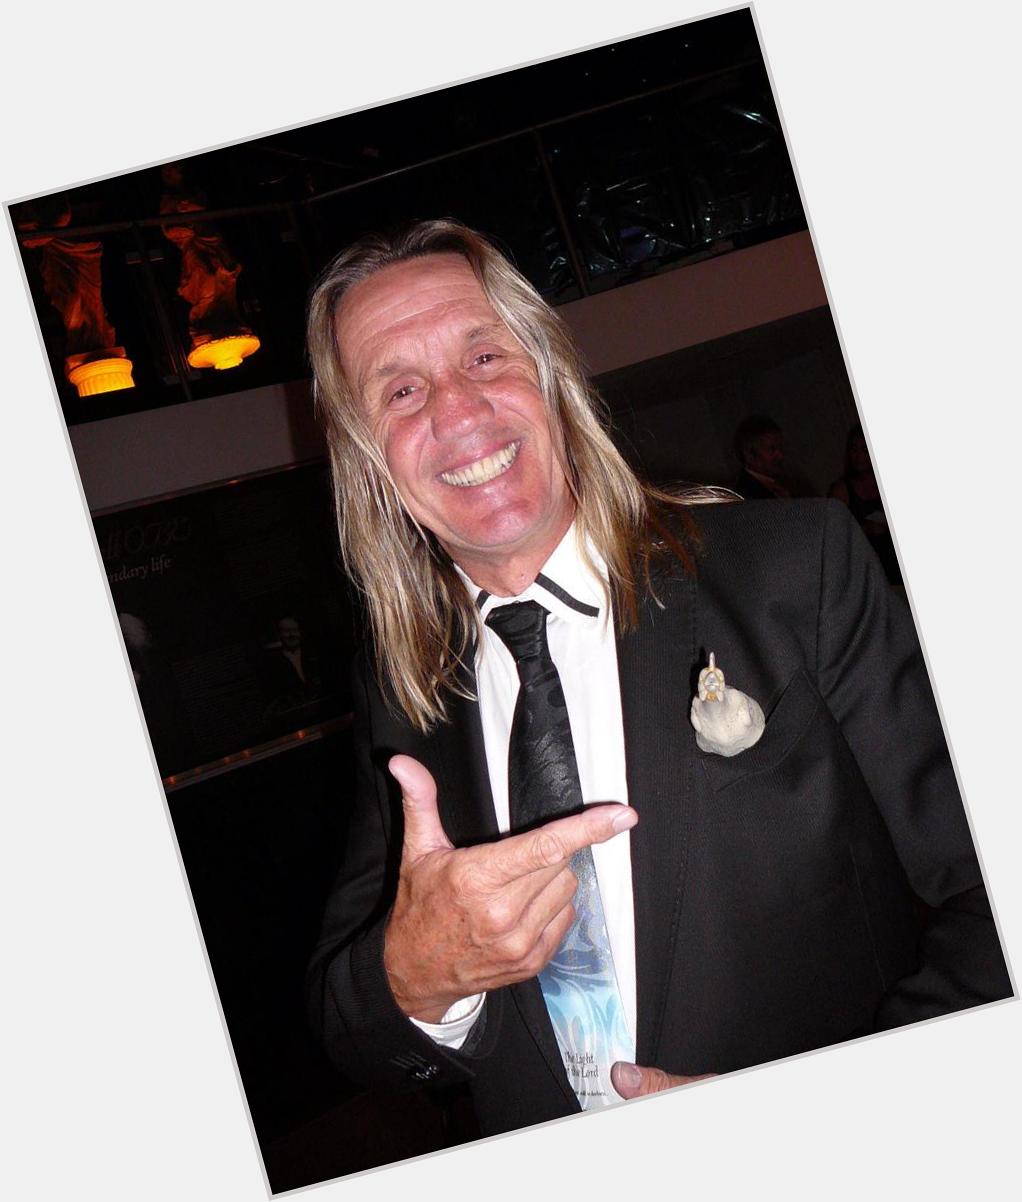 Happy birthday to this great guy, Nicko McBrain   